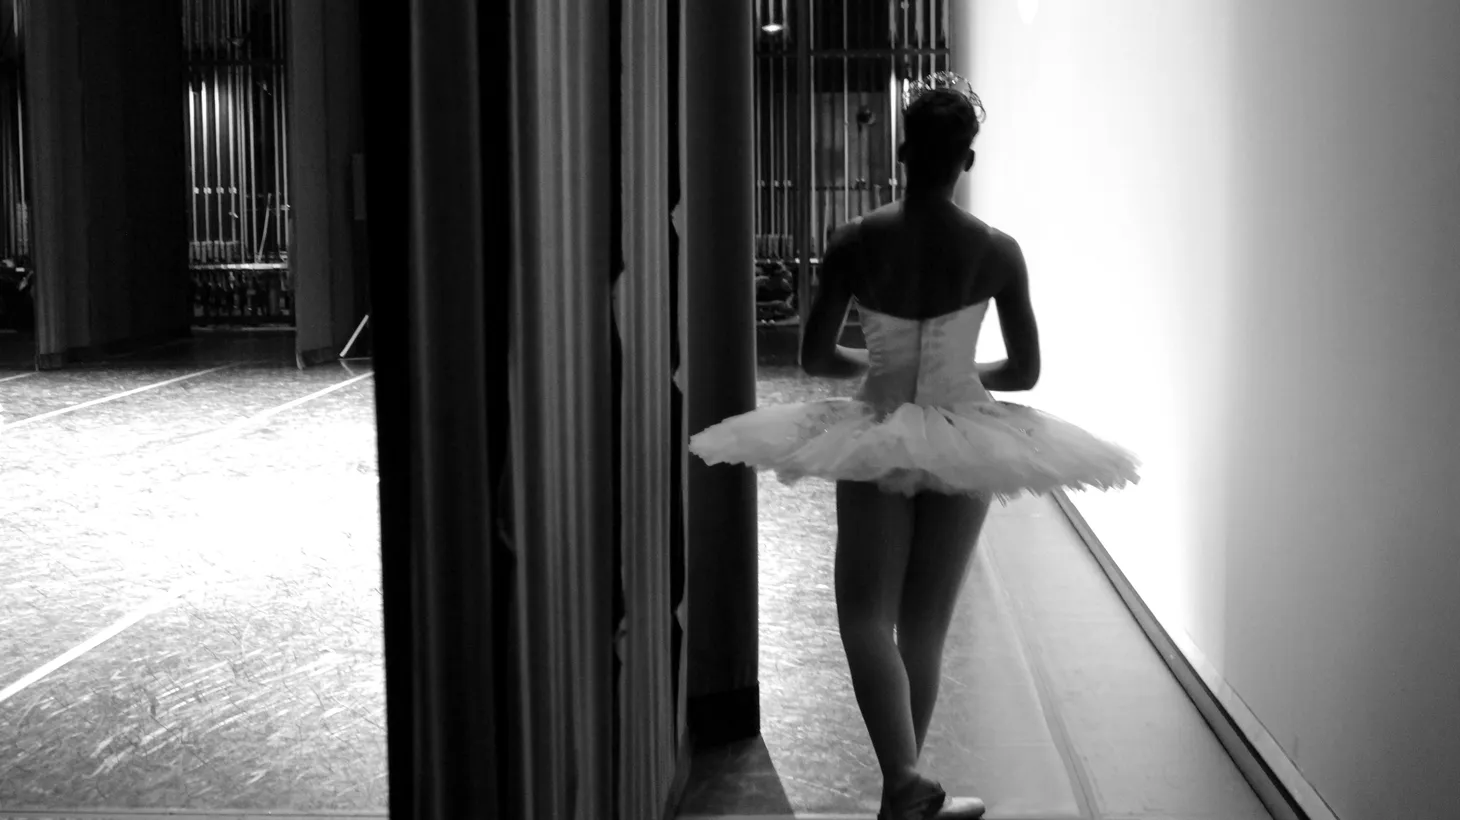 Lēya Graham stands poised in the wings of the stage, seconds away from performing Gamzatti’s Variation from the ballet La Bayadère.